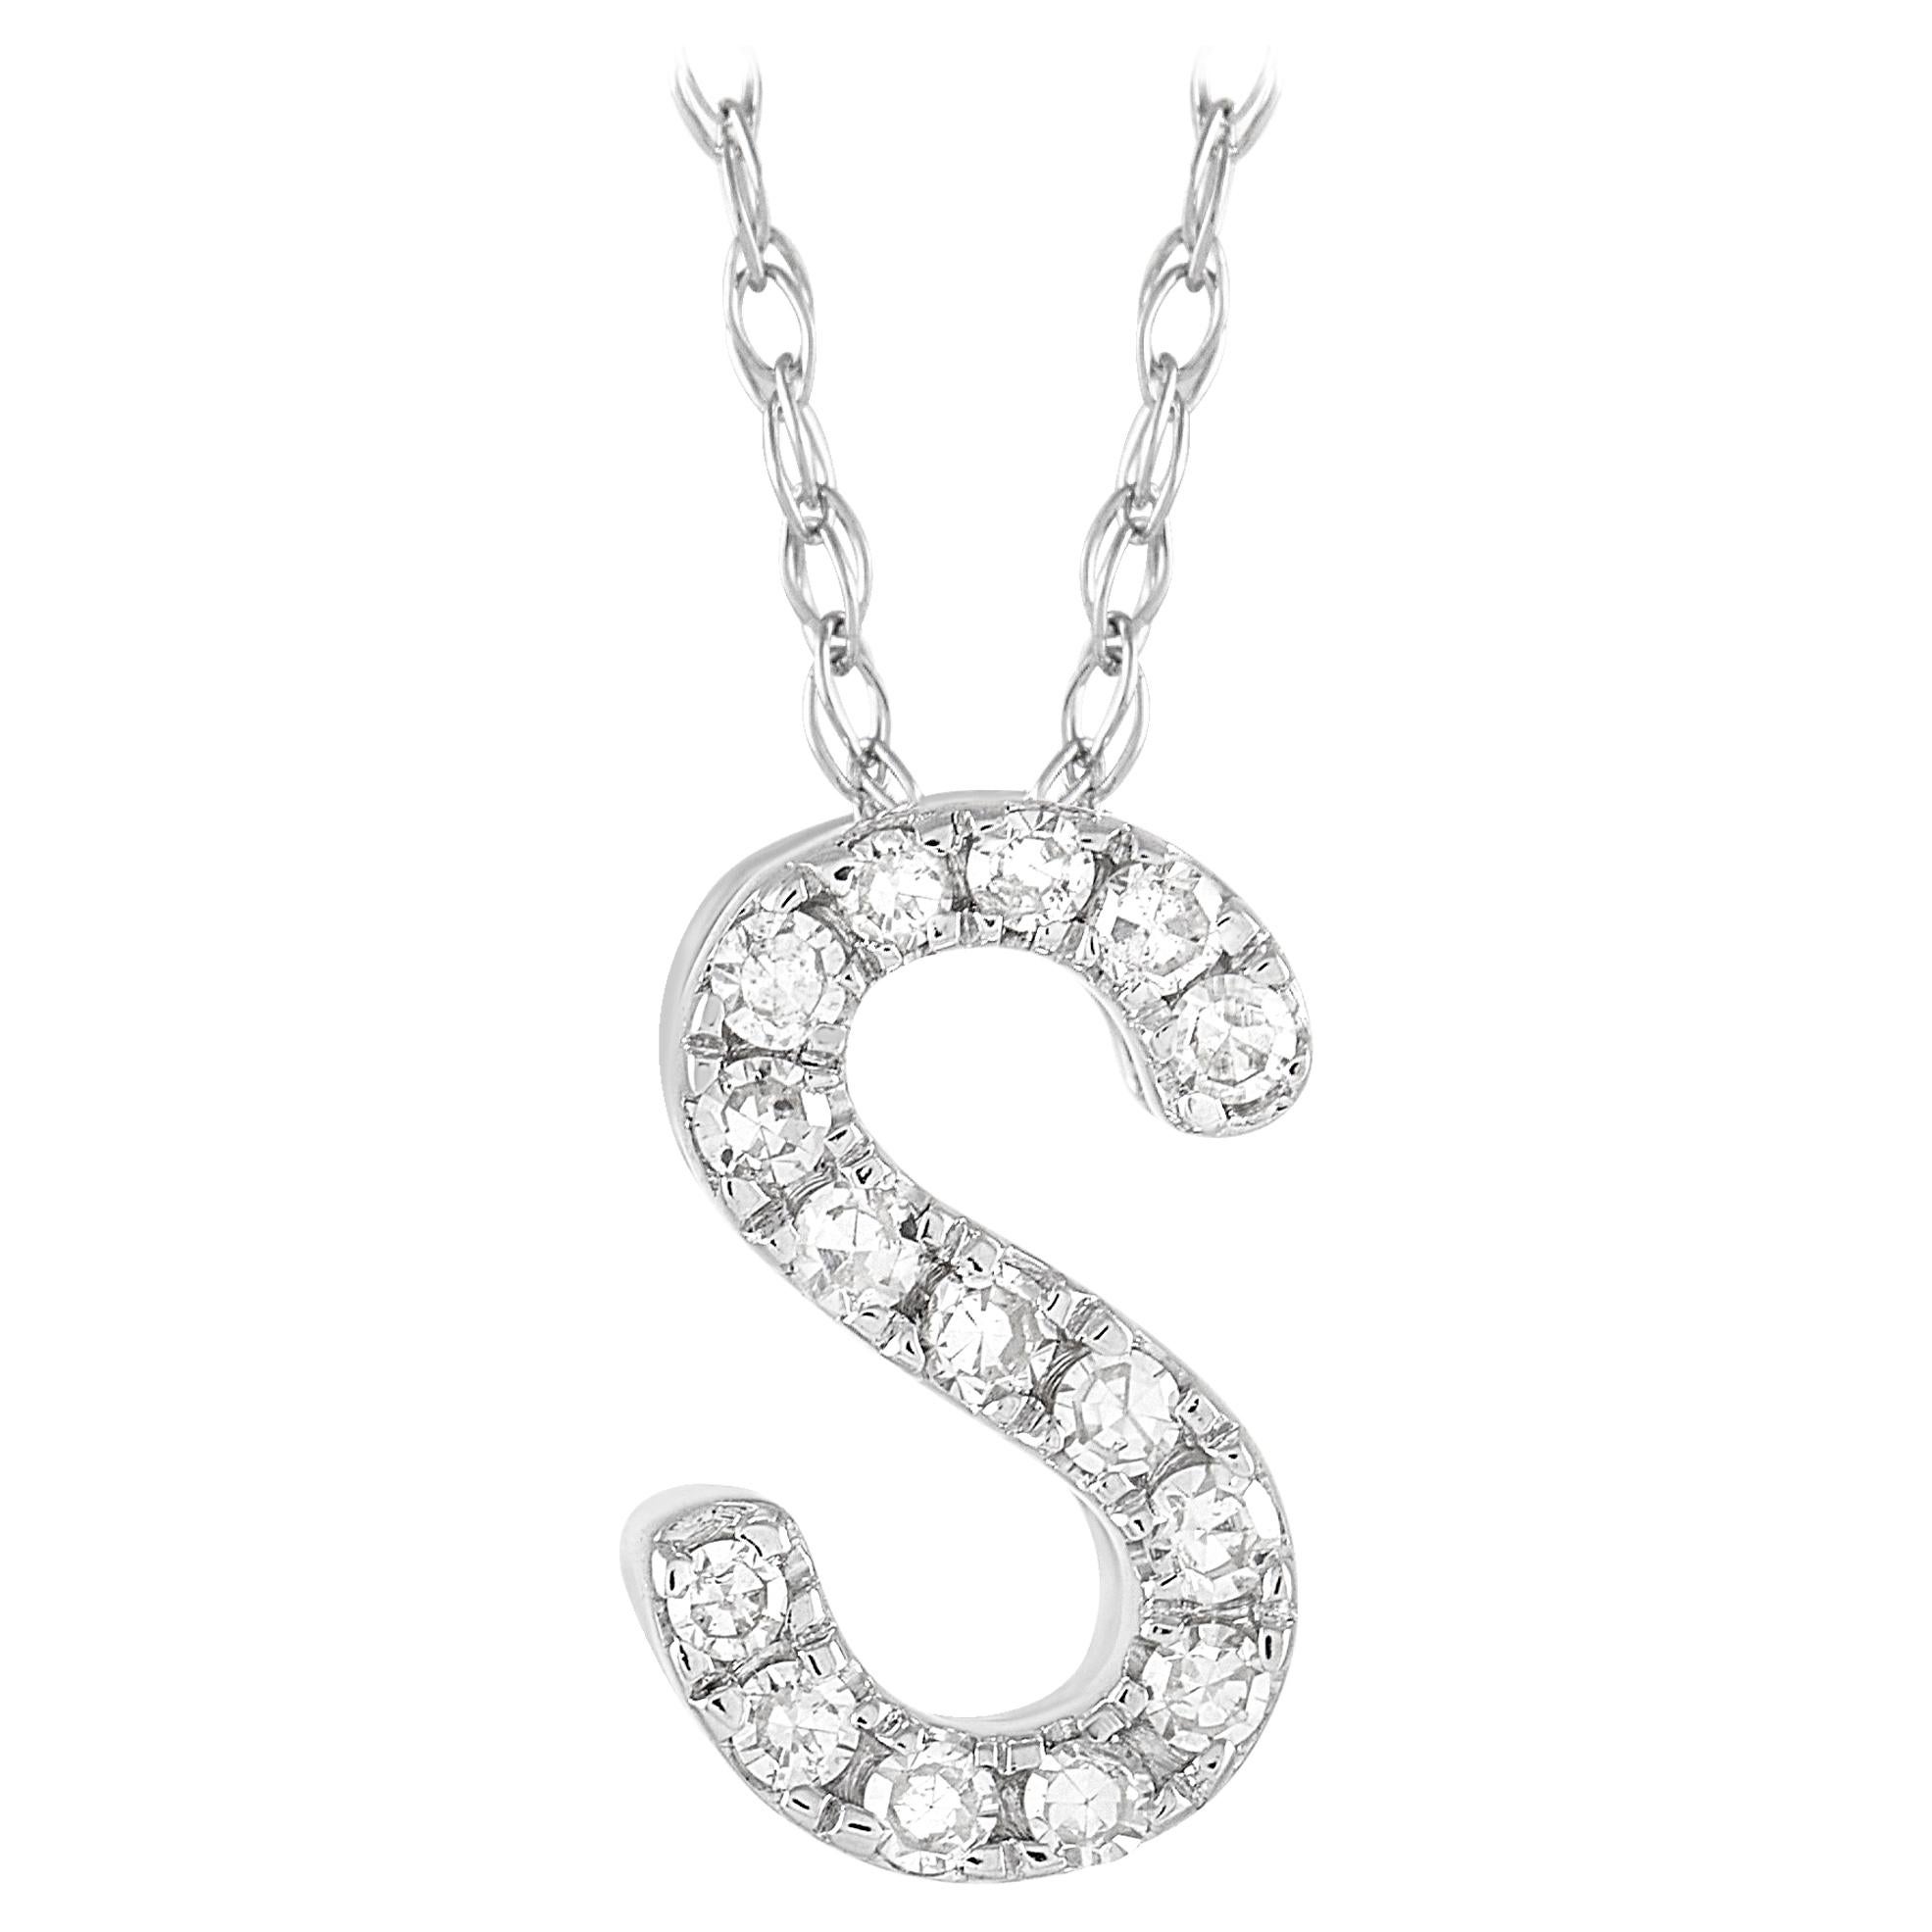 LB Exclusive 14K White Gold 0.10 Ct Diamond Initial ‘S’ Necklace